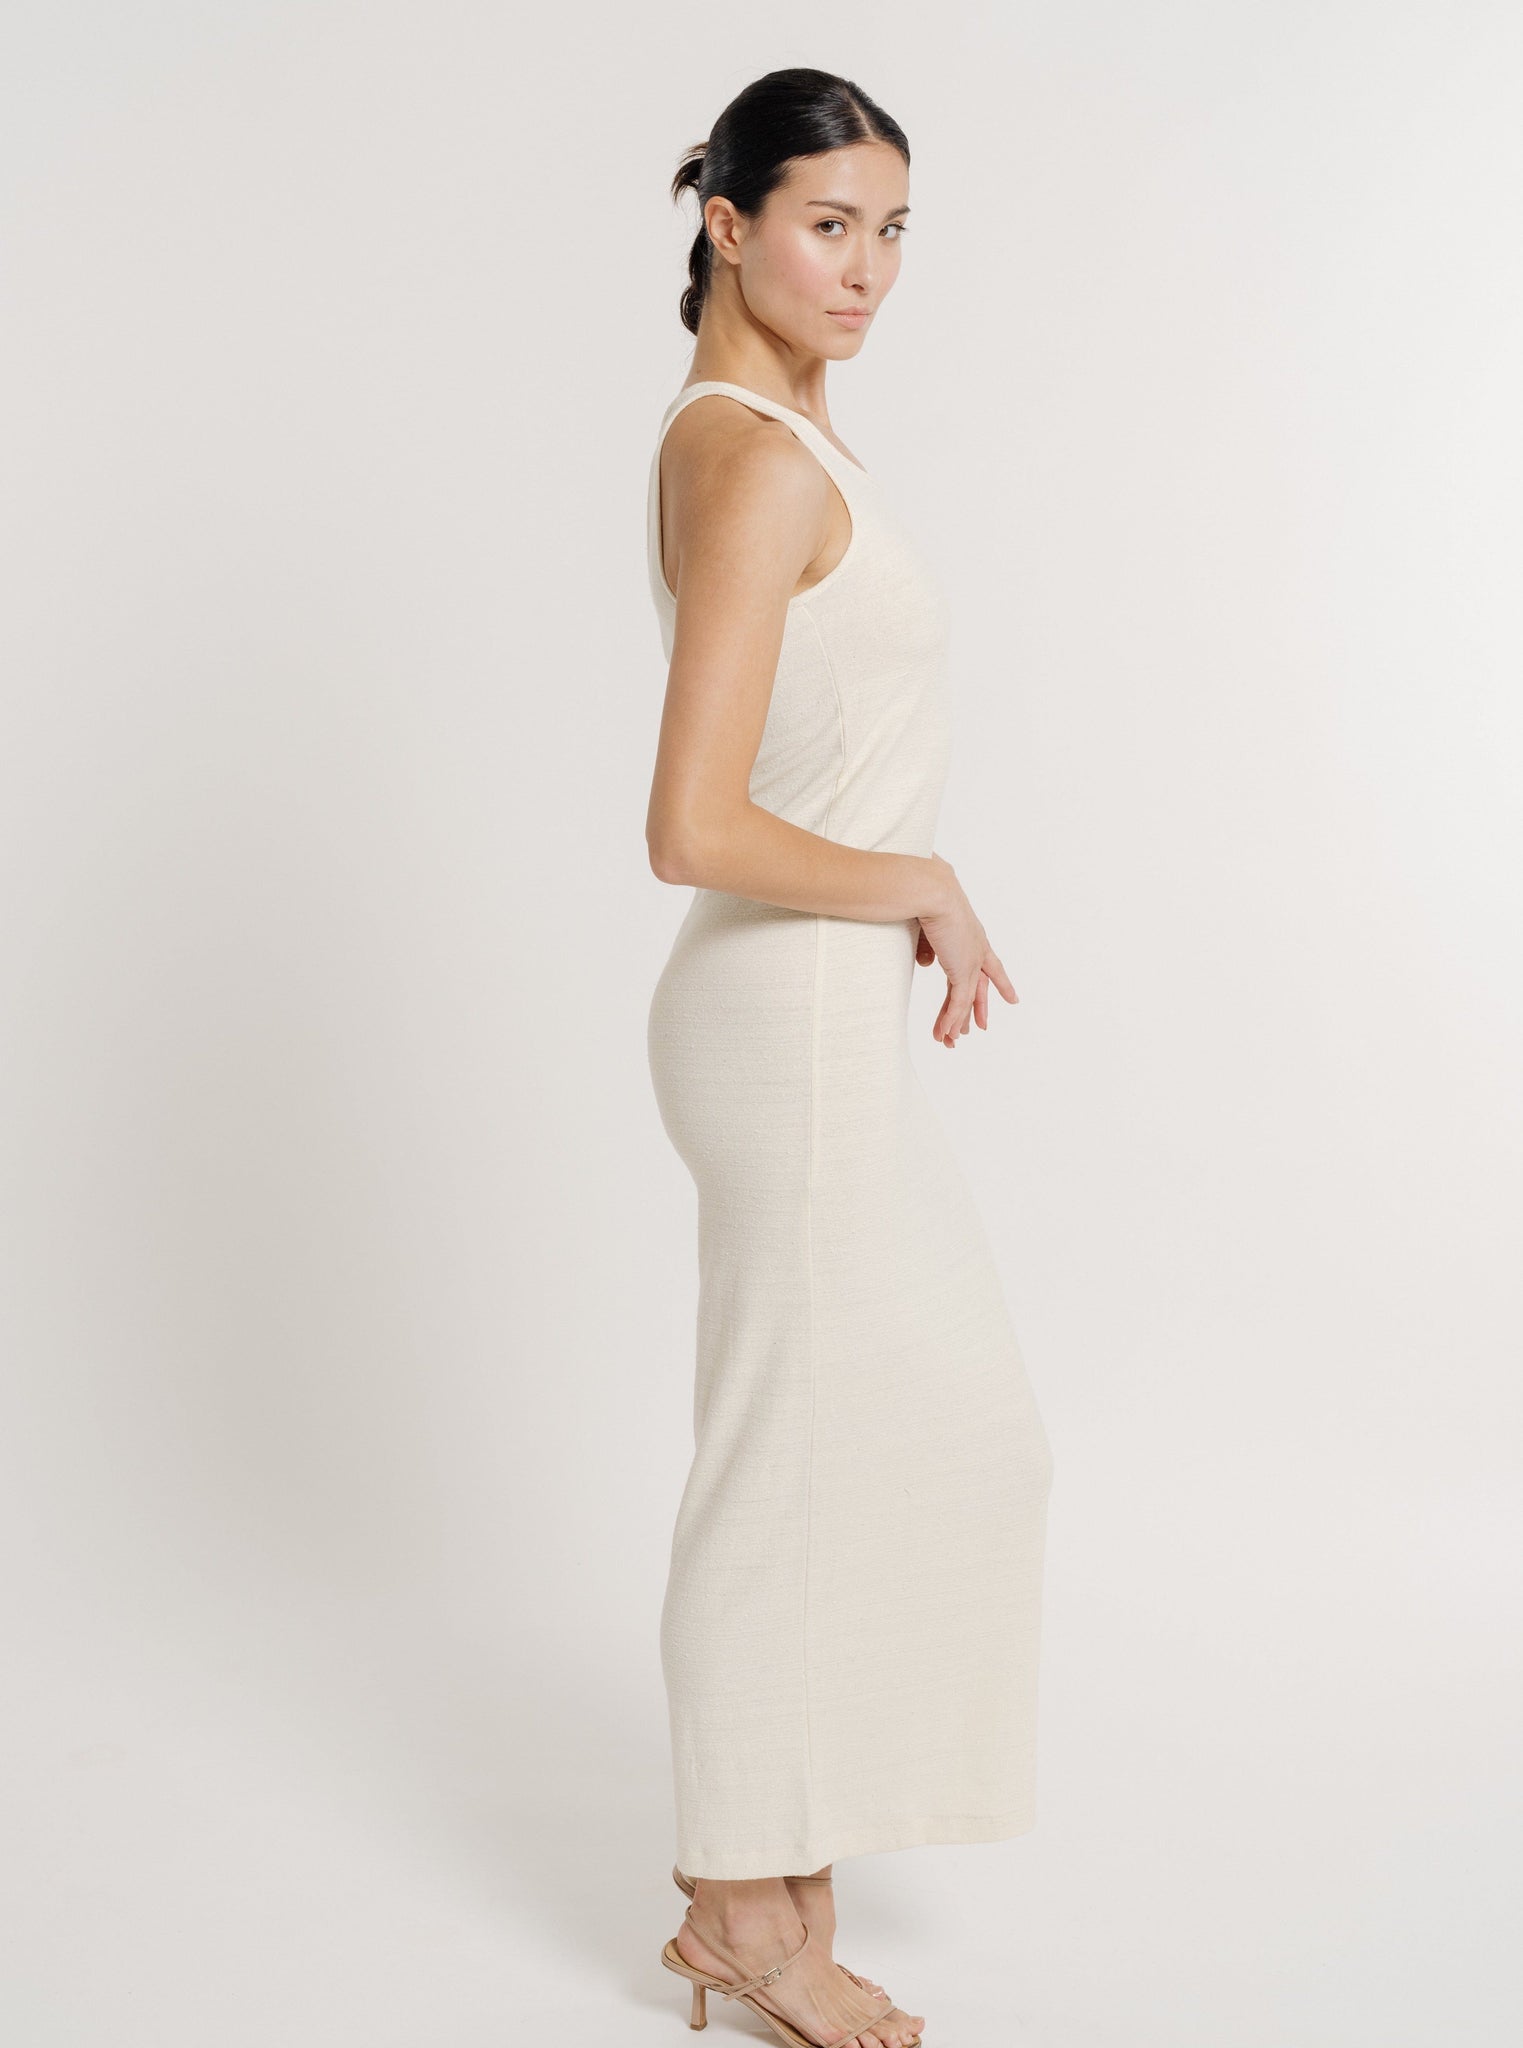 The model is wearing a sustainable Jersey Knit Tank Dress - Ivory Silk Noil - Pre-order, showcasing individuality.